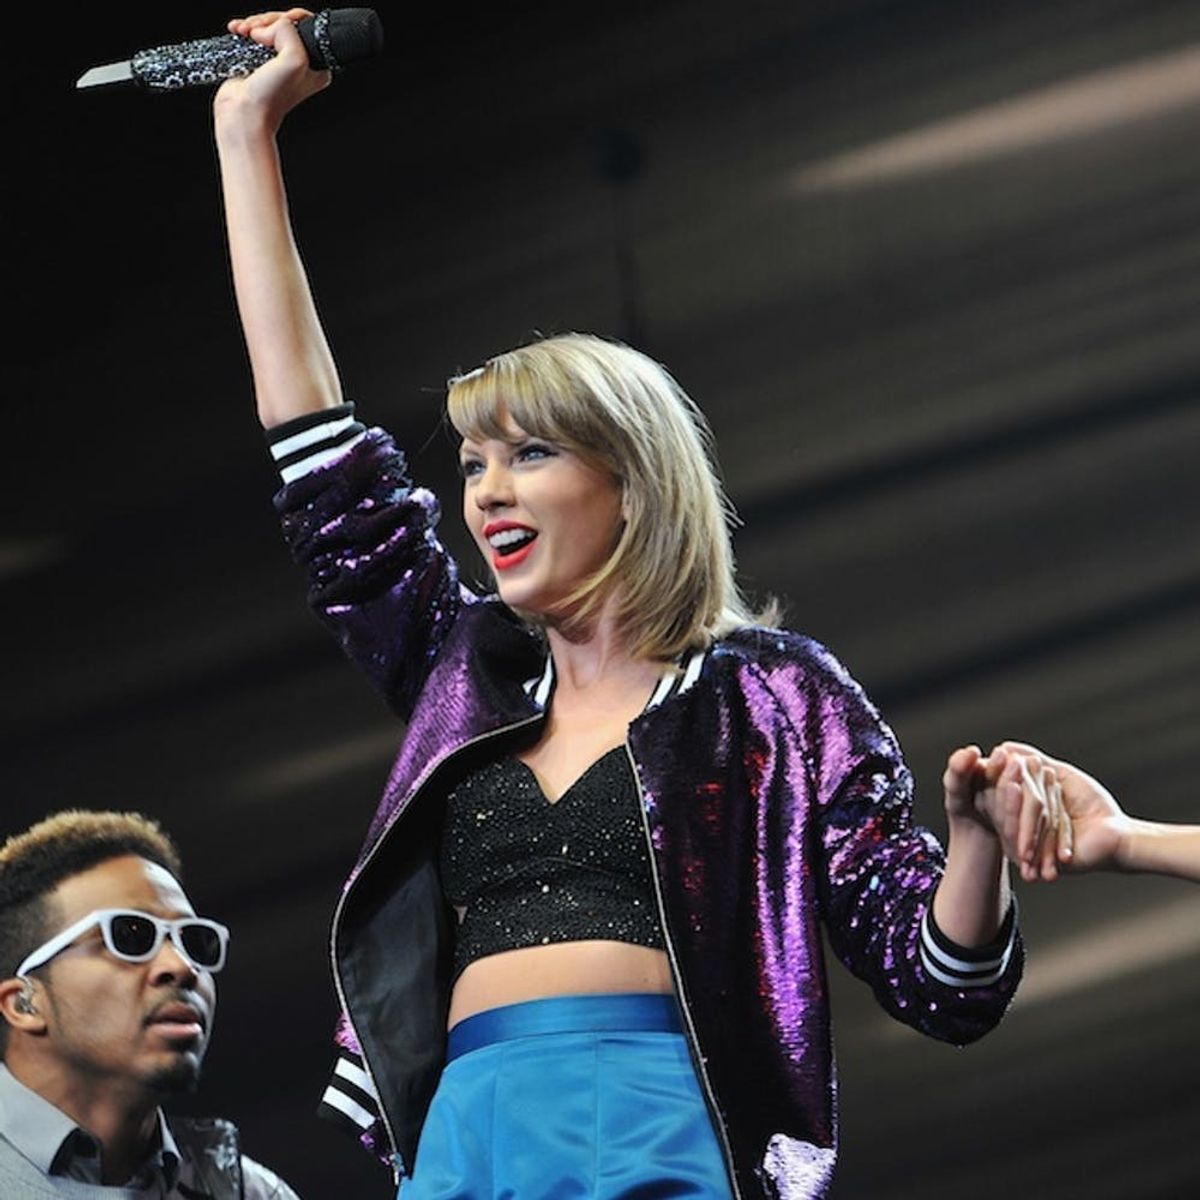 This Is the Surprising Crowdsourcing Campaign Taylor Swift Donated To